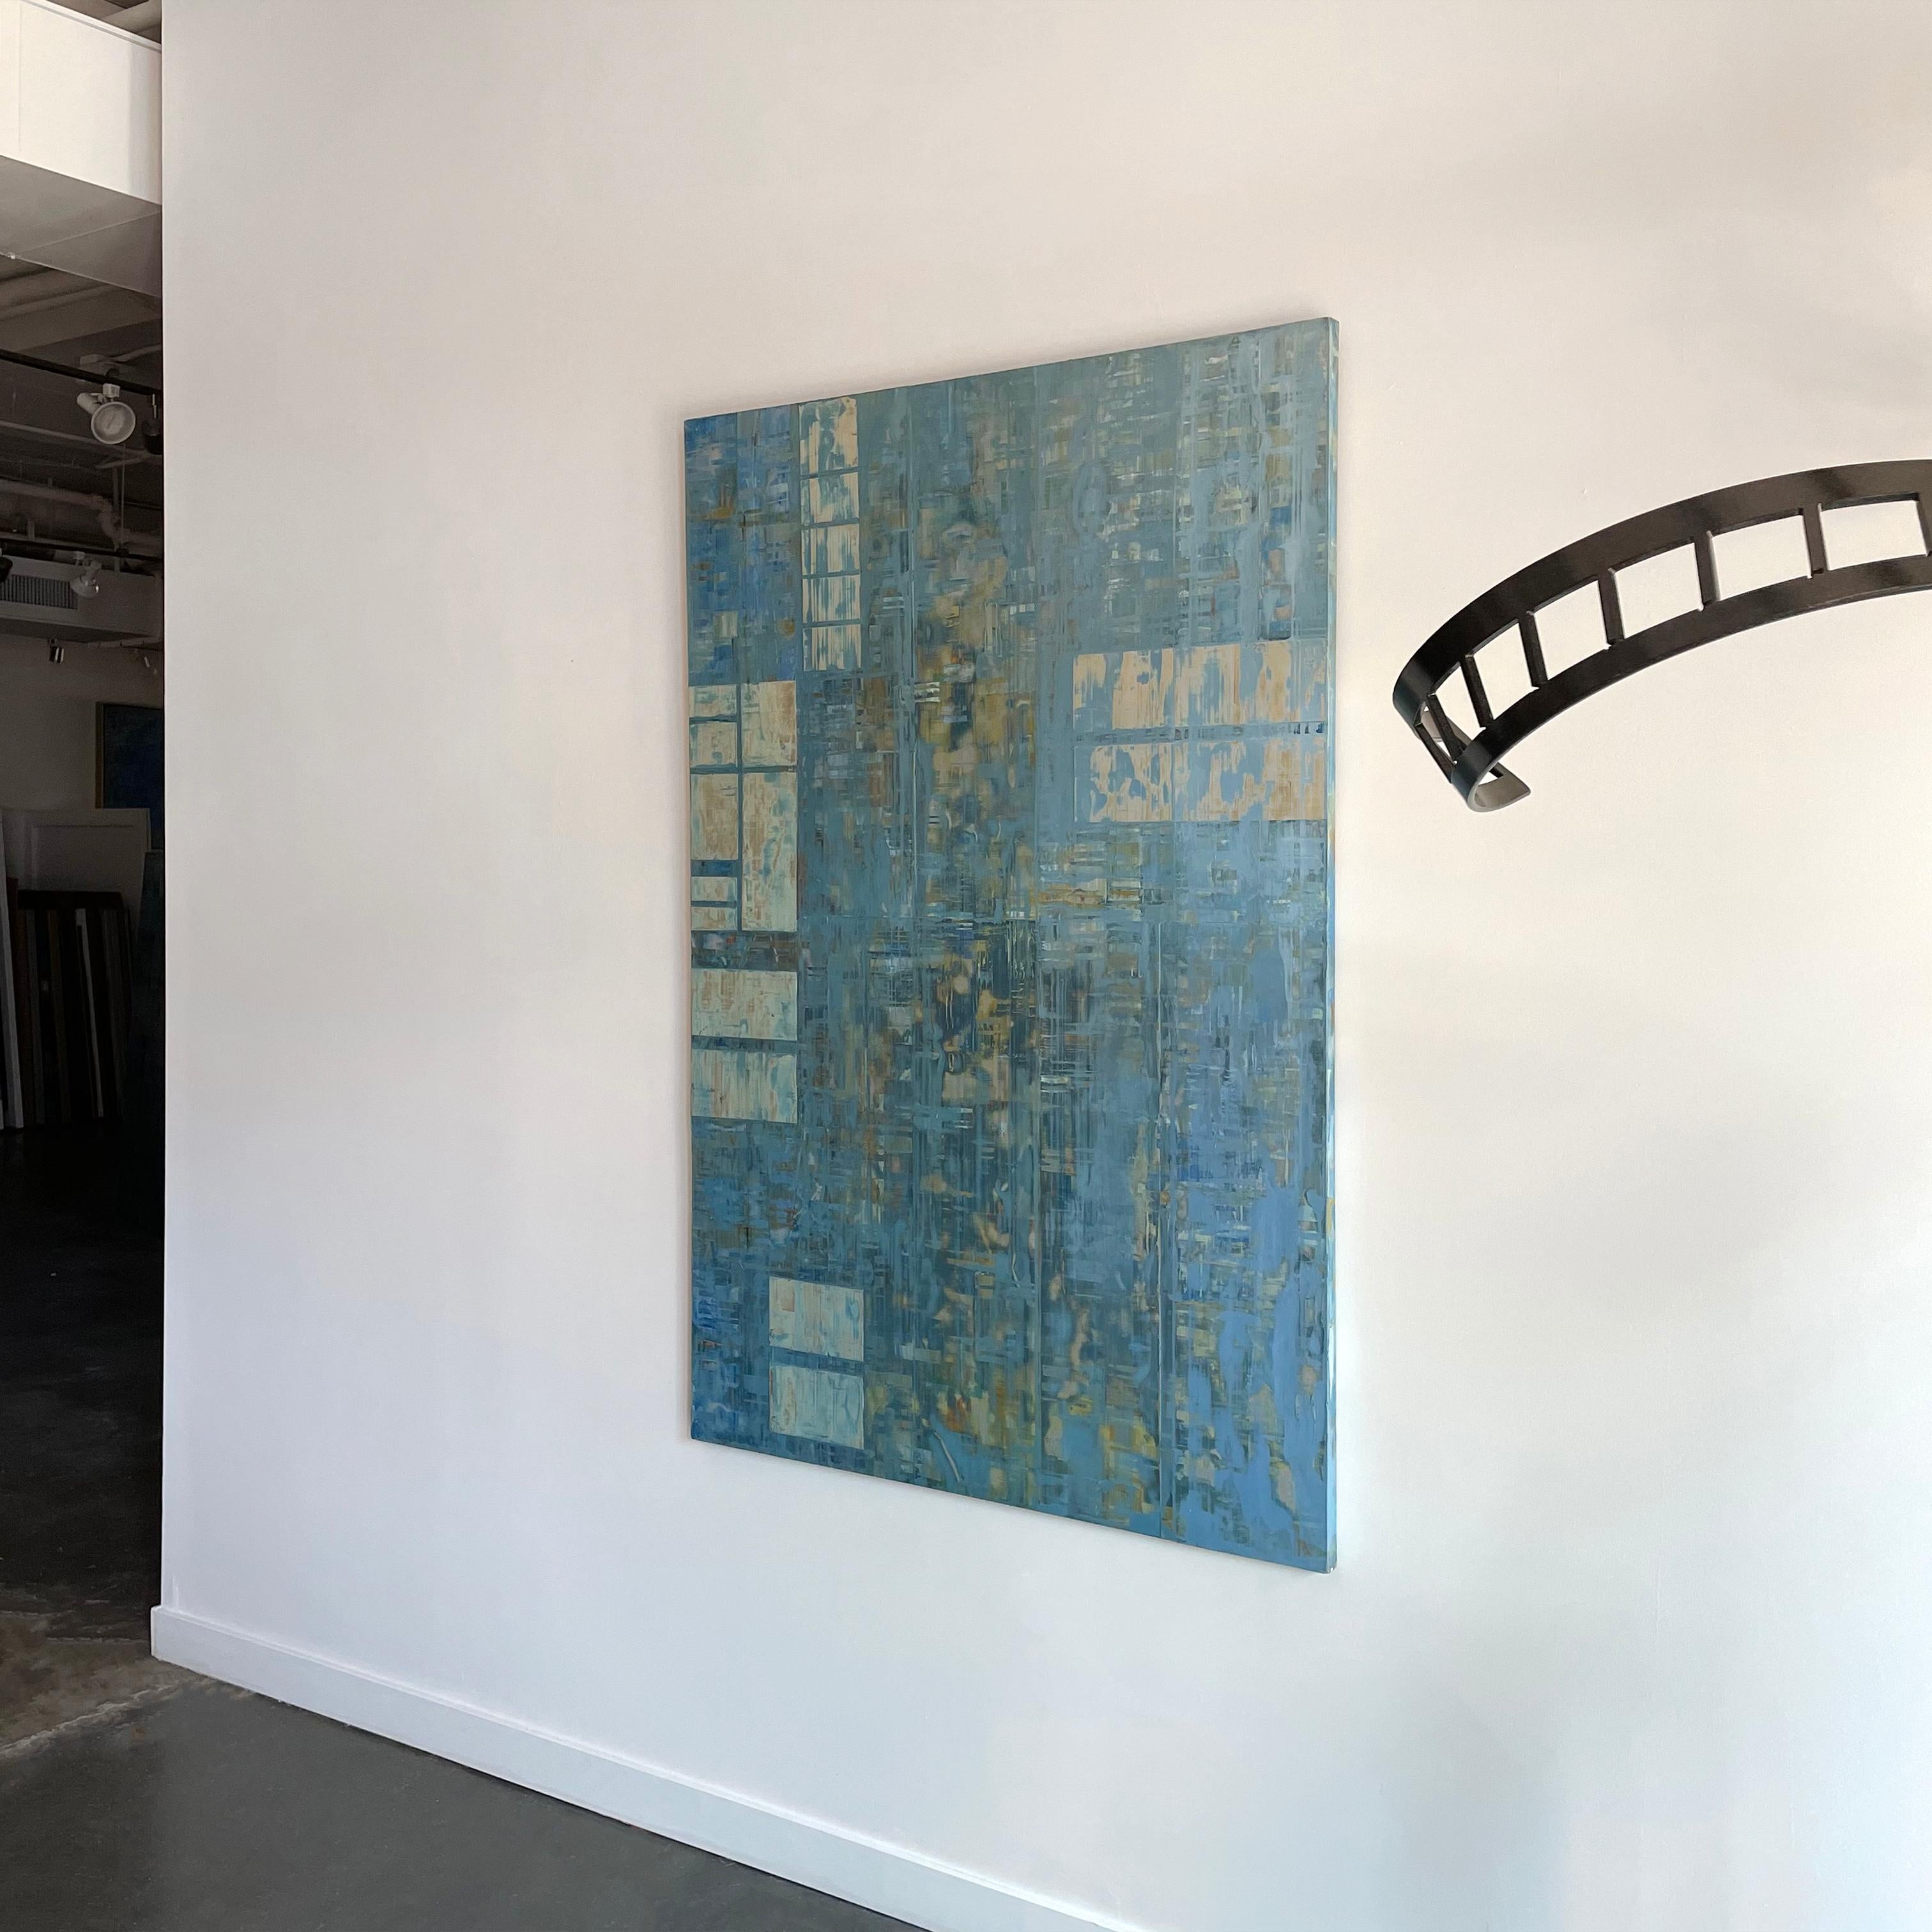 This abstract metallic statement painting by Ned Martin is made with oil paint and aluminum on board. Metallic silver rectangles are tiled in clusters throughout the composition, with layers of blue and warm accents above and below the metallic